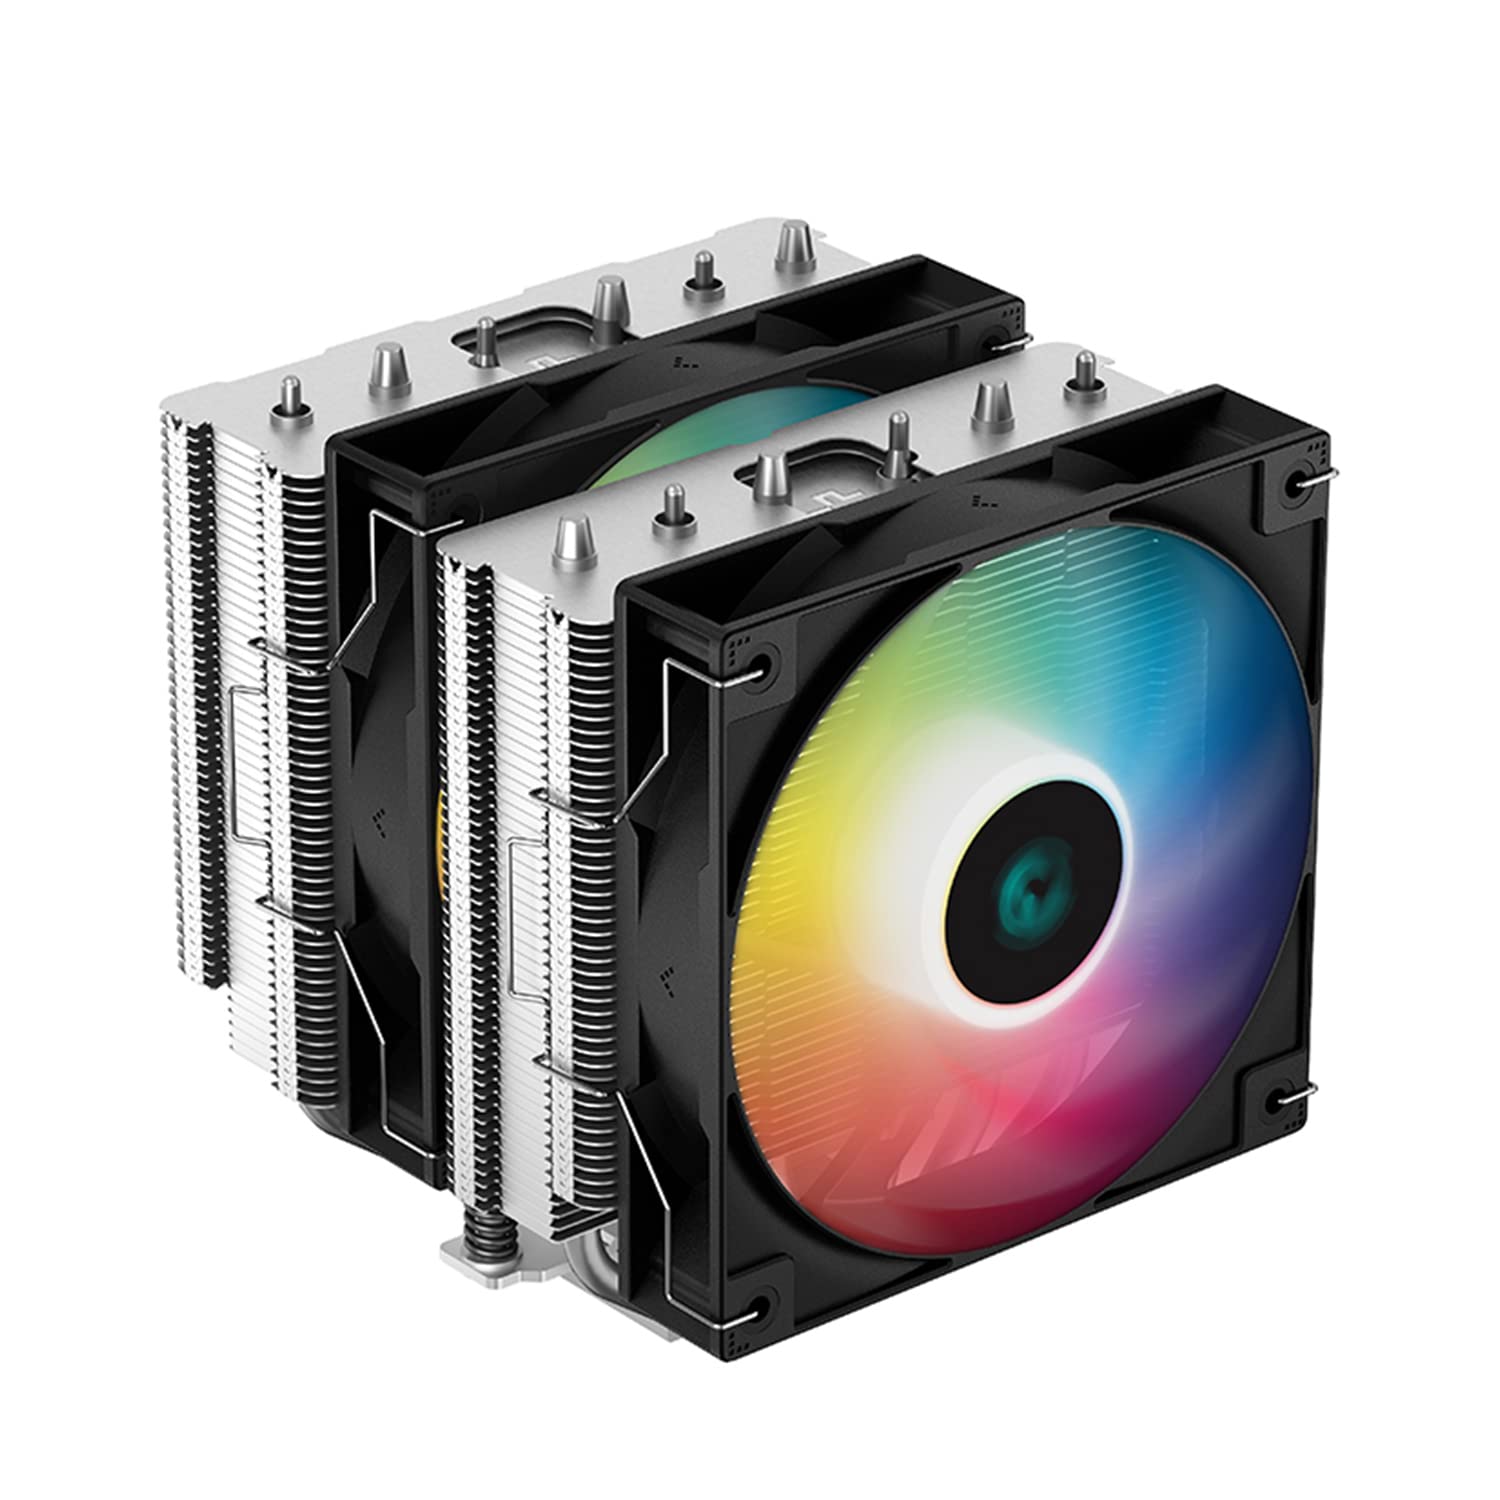 Deepcool Air Cooler AG620 with dual ARGB fan Support : Intel LGA2066/2011-v3/2011/1700/1200/1151/1150/1155 and AMD AM5/AM4 - R-AG620-BKANMN-G-1-Computerspace-computerspace